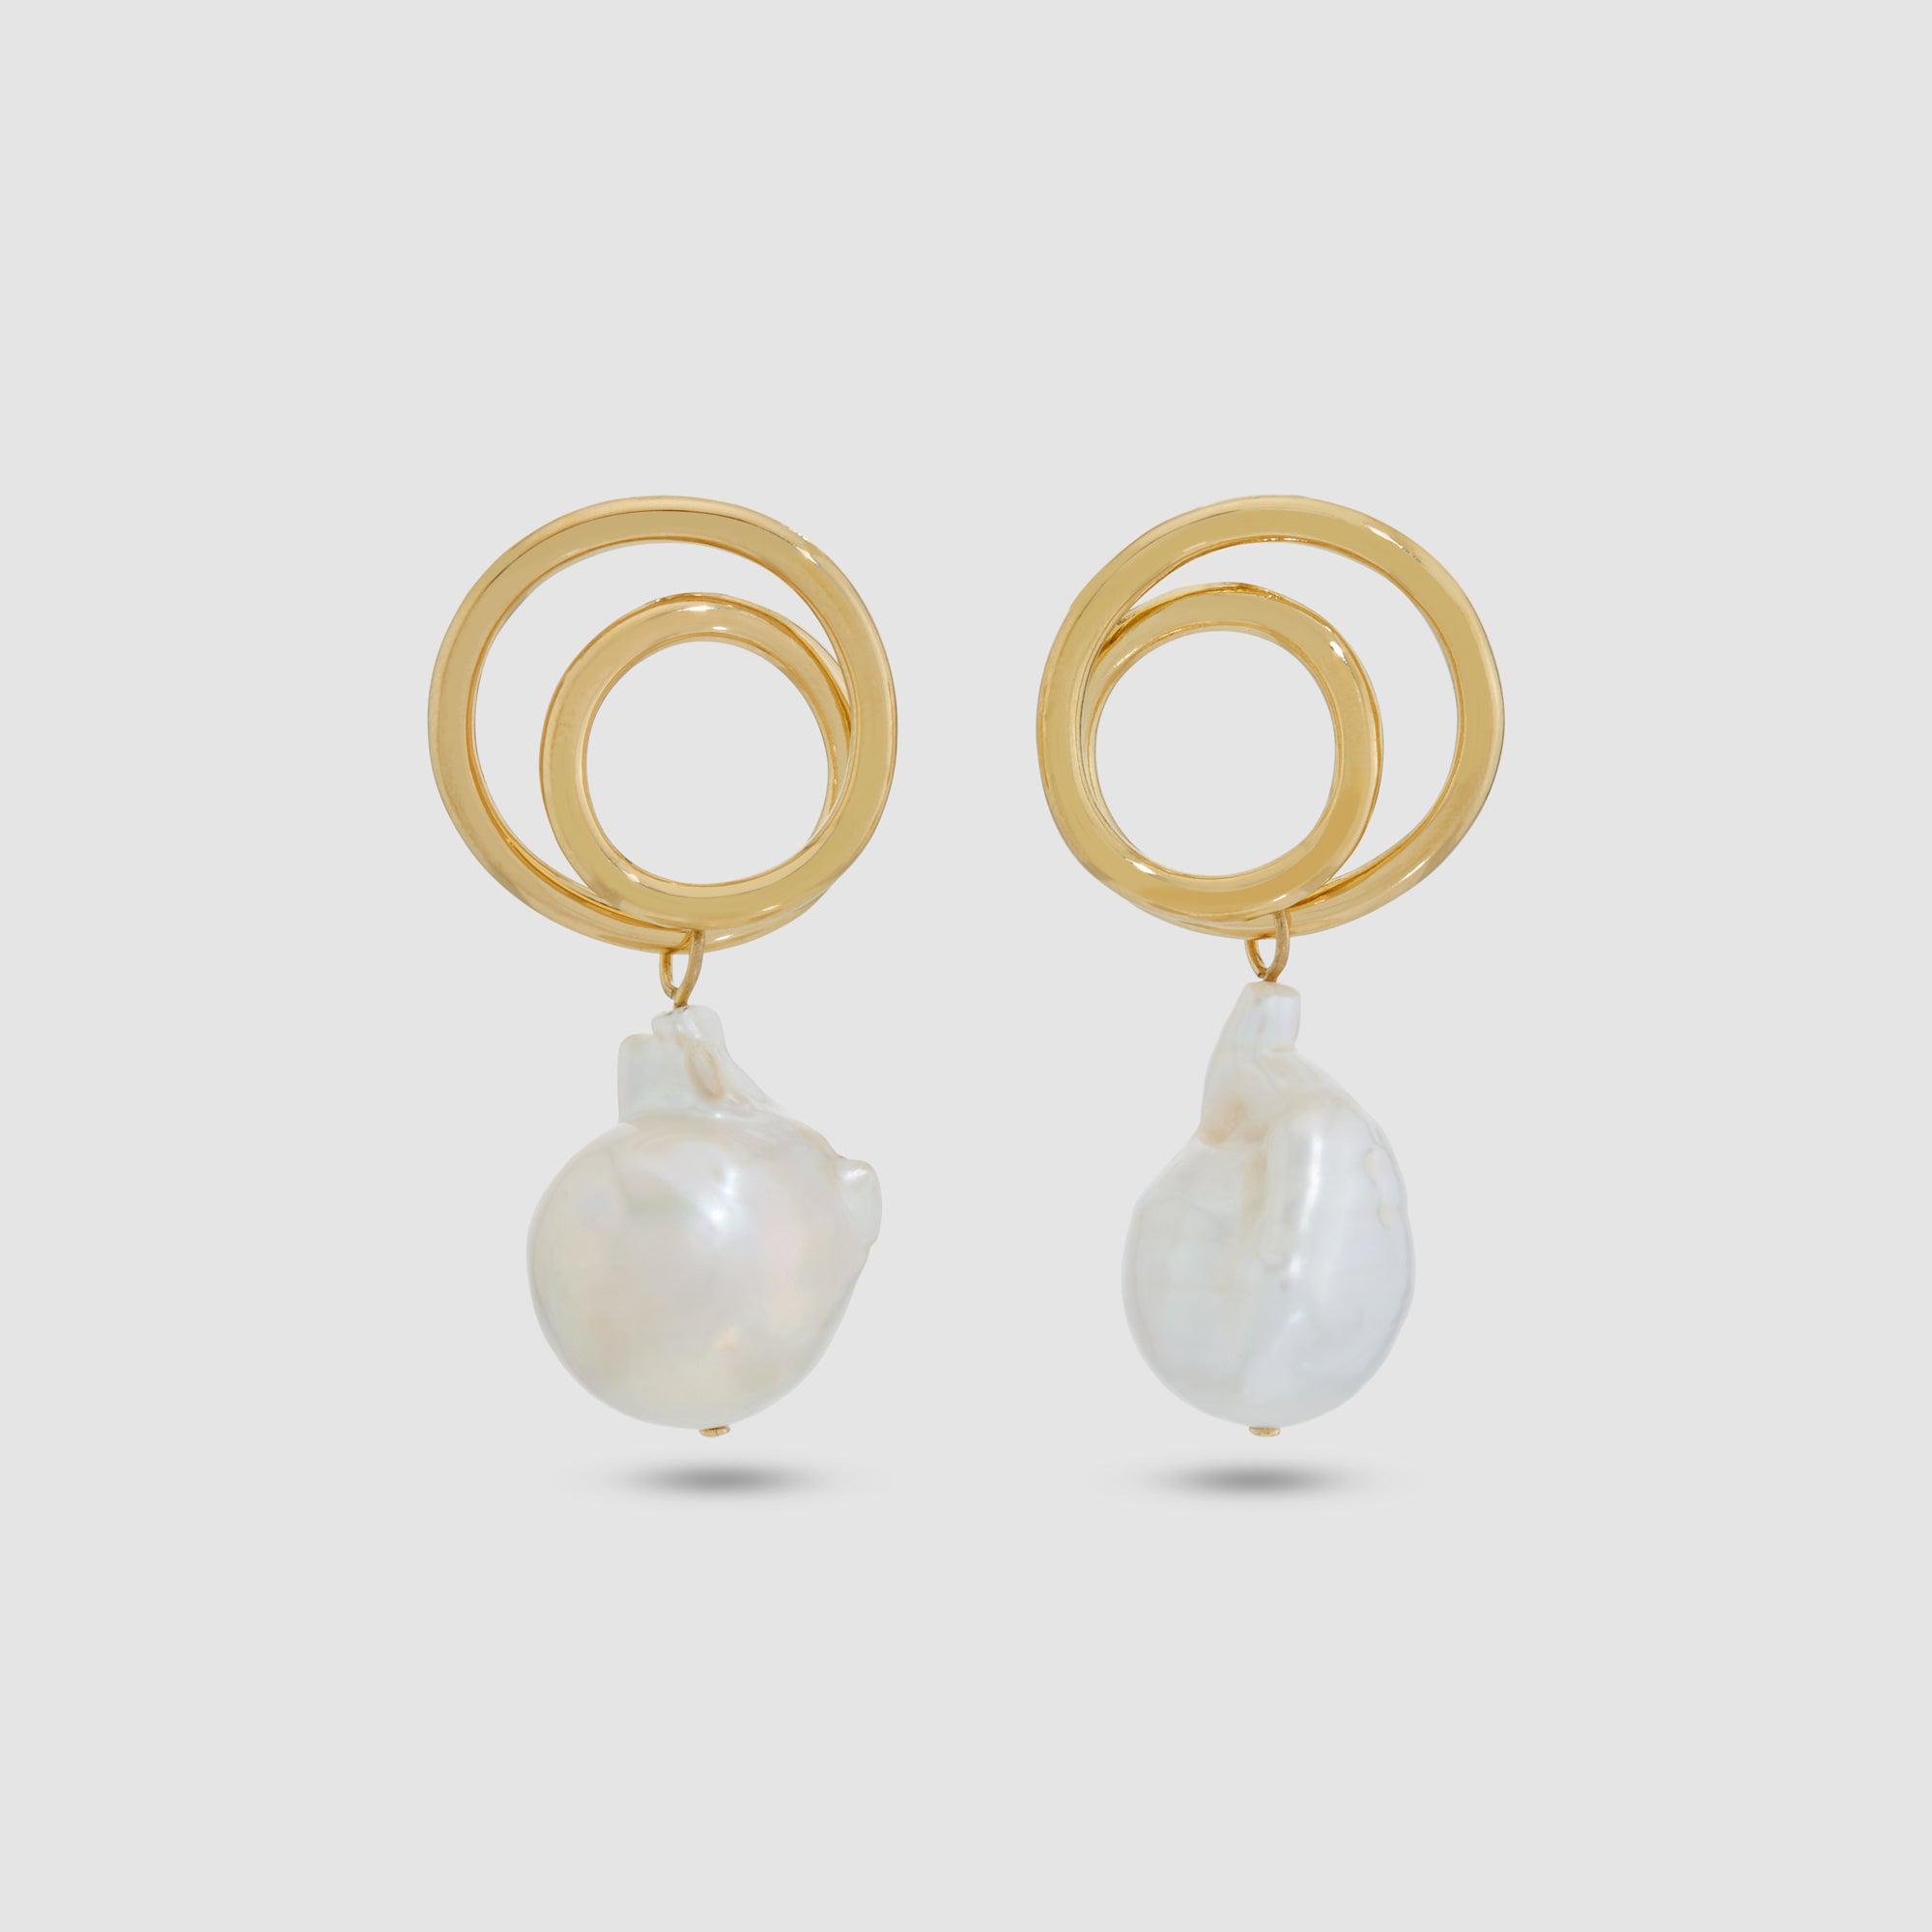 Completedworks Spiral Earrings with Fresh Water Pearls by COMPLETEDWORKS